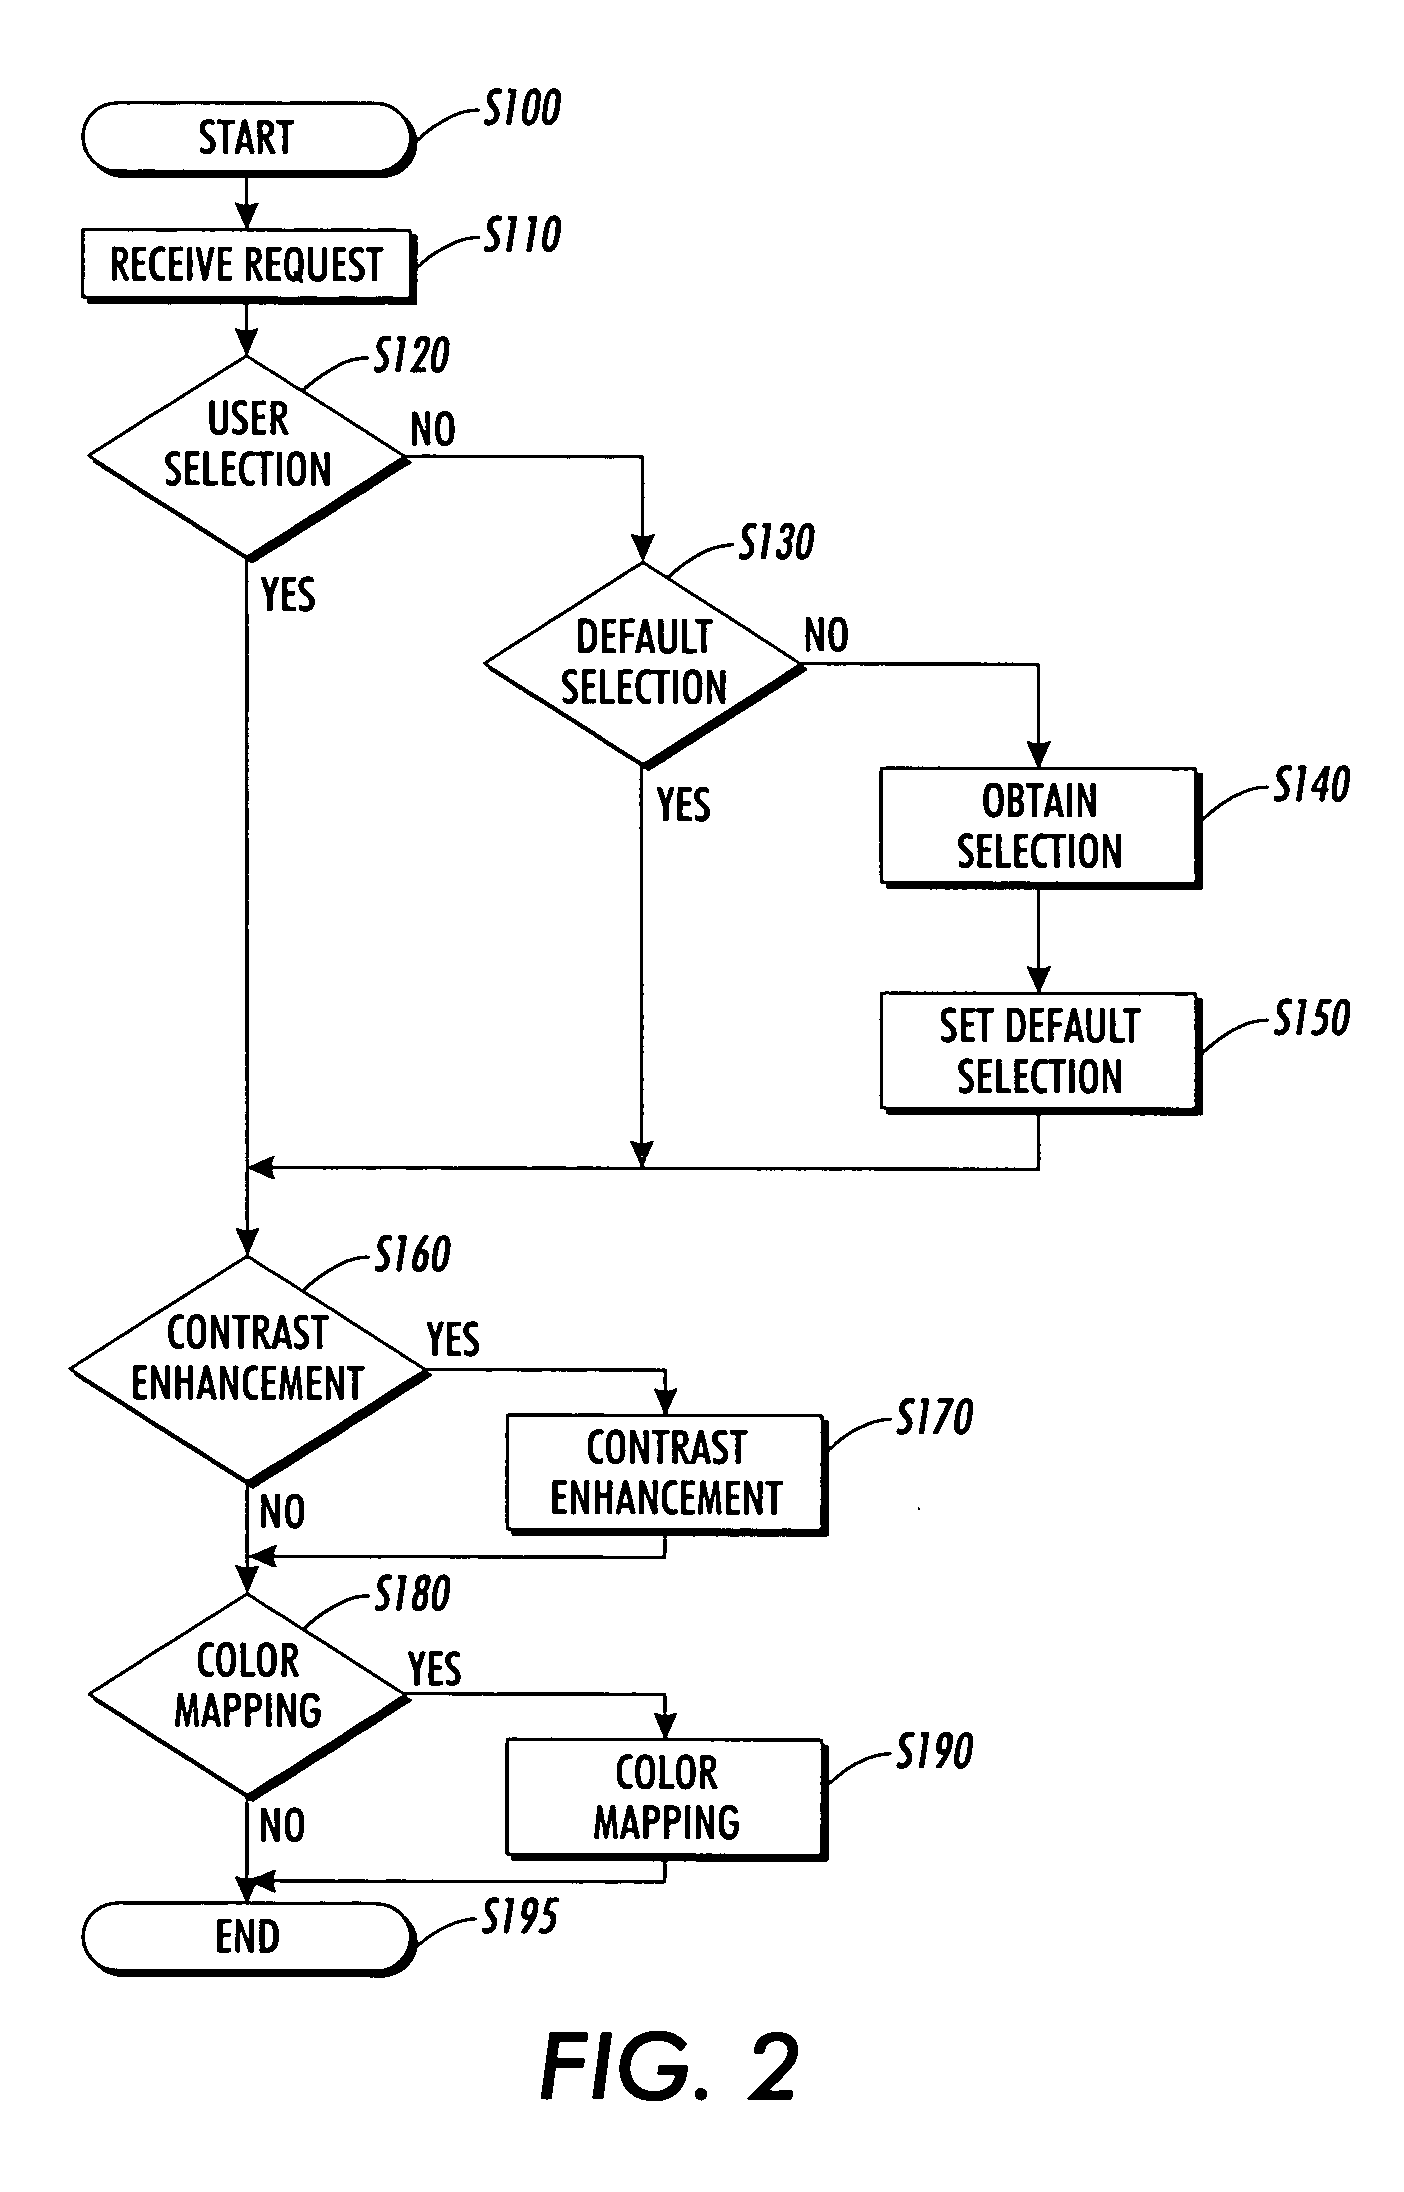 Systems and methods for processing image data prior to compression